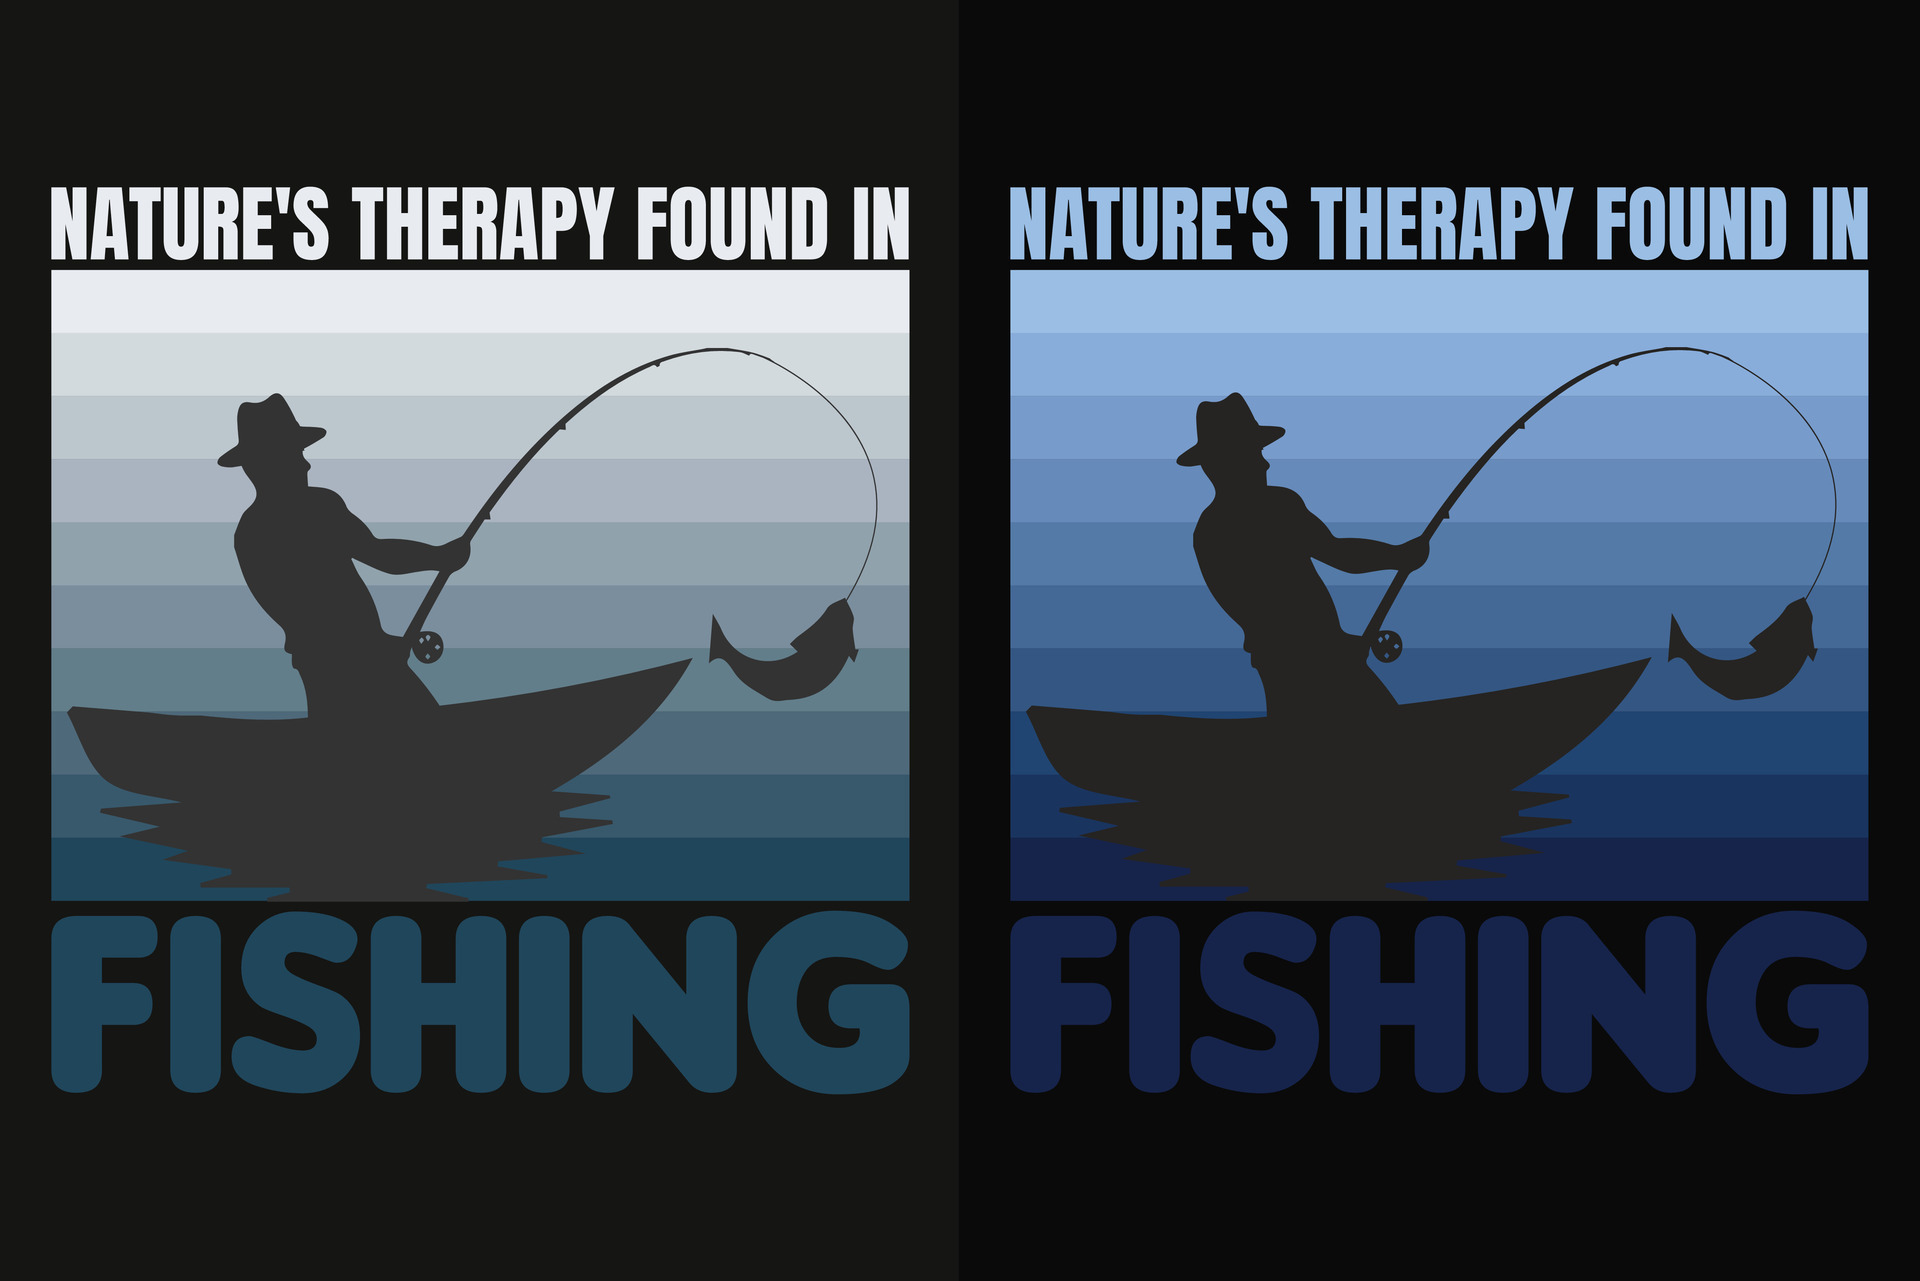 https://static.vecteezy.com/system/resources/previews/027/012/586/original/nature-s-therapy-found-in-fishing-fishing-shirt-fisherman-gifts-fisherman-t-shirt-funny-fishing-shirt-present-for-fisherman-fishing-gift-fishing-dad-gifts-fishing-lover-shirt-vector.jpg